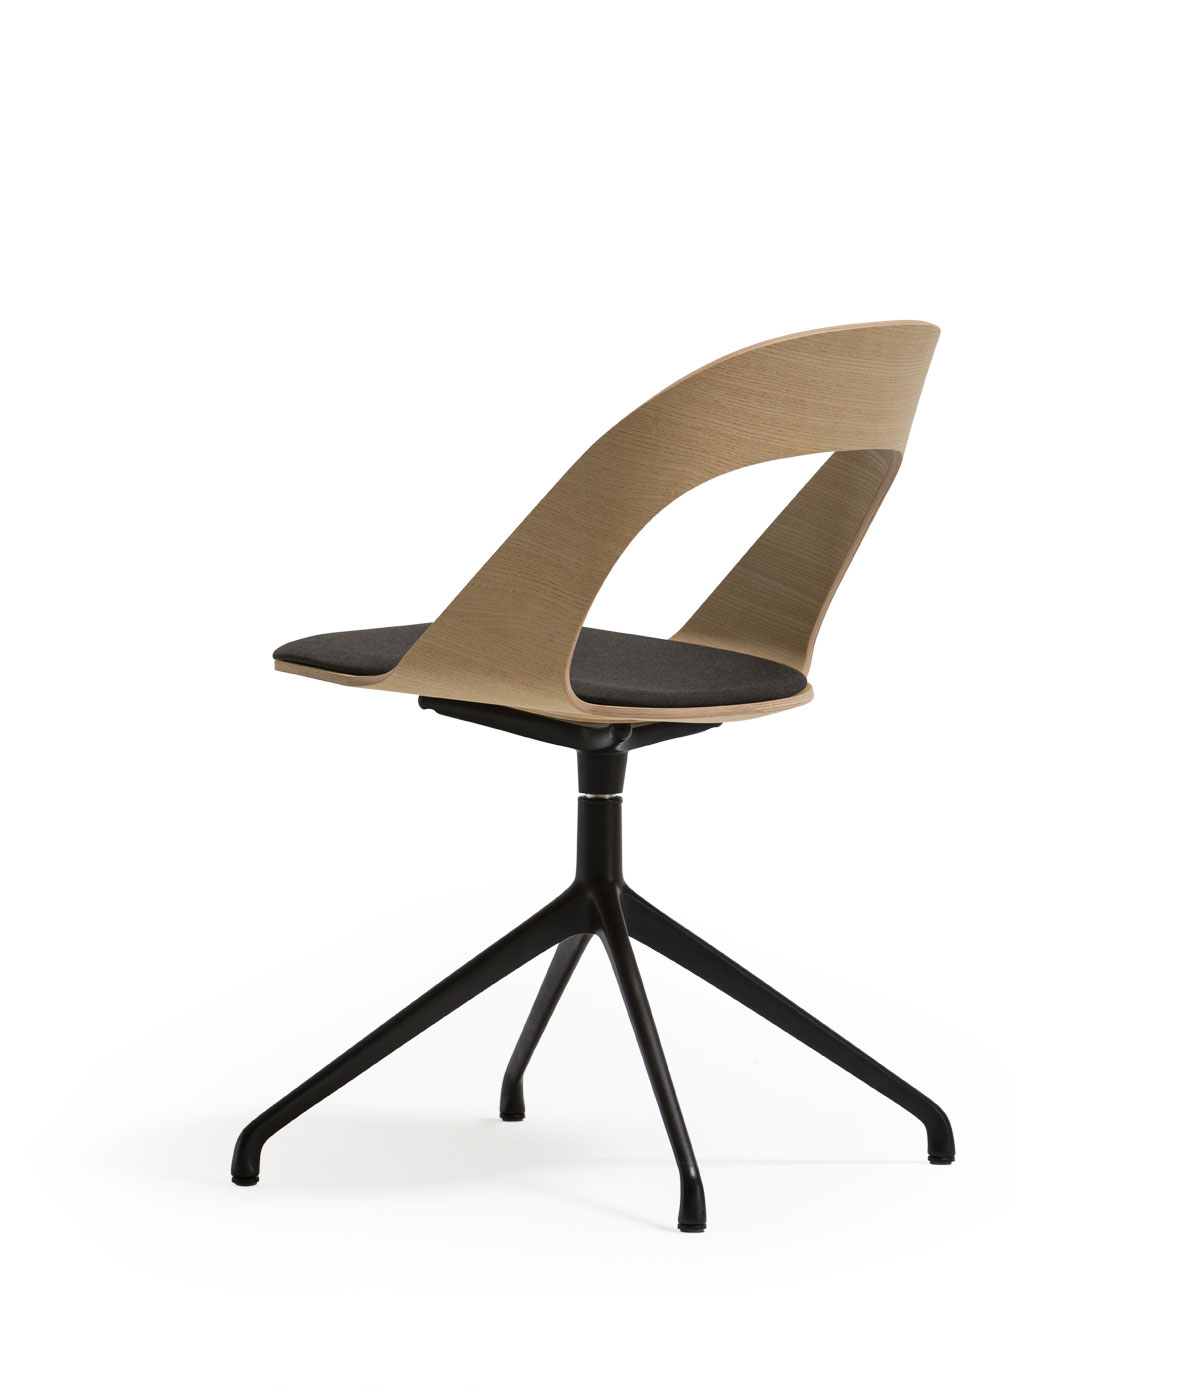 Goose chair Model D with 4 rollers swivel base - Vergés